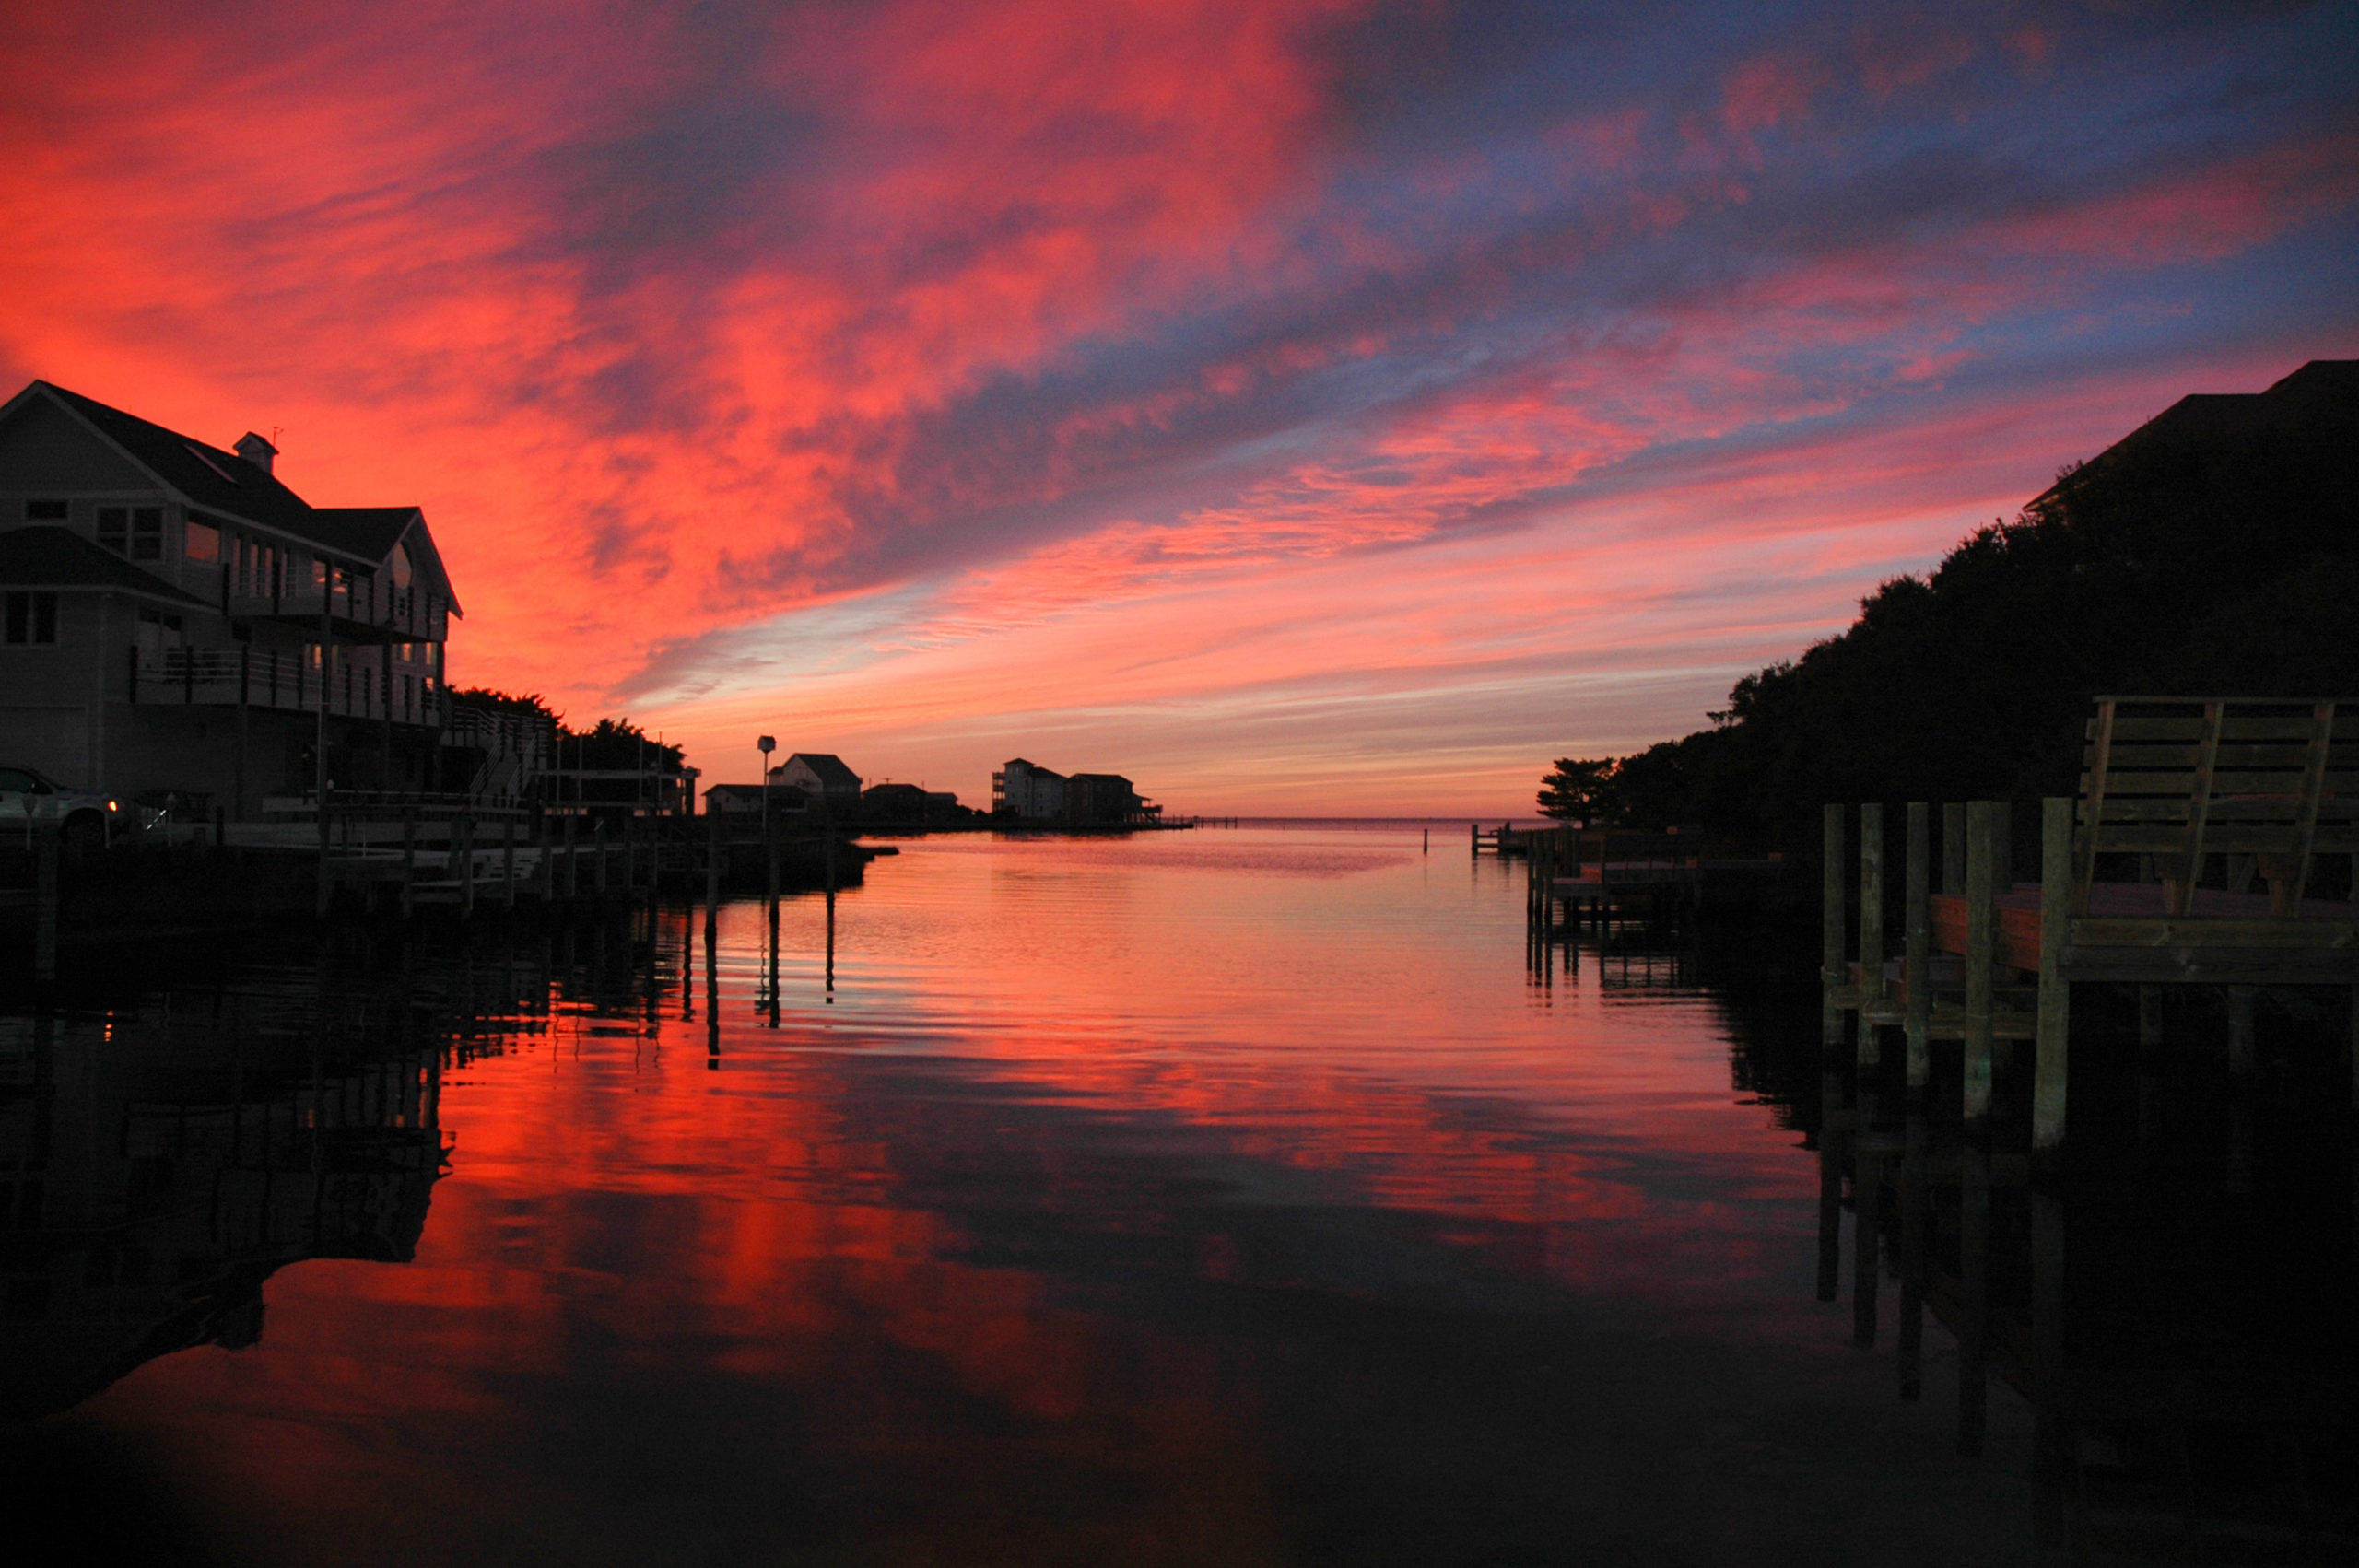 January Sunset in Brigand's Bay, Frisco, NC